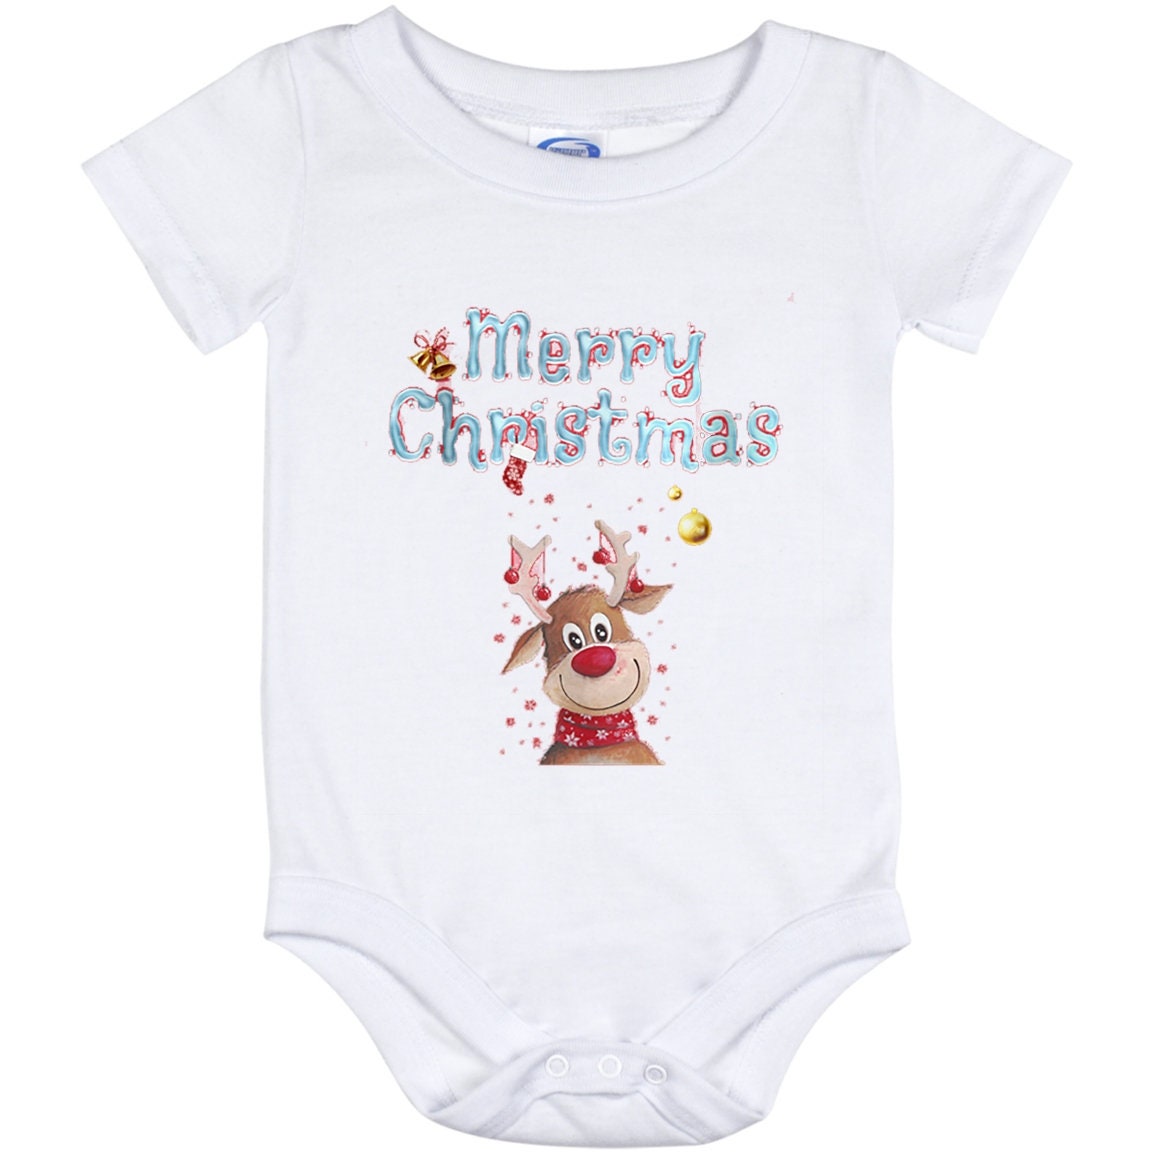 Chritmas Baby Bodysuit Merry Christmas Rudolph Baby Body Suit Spun Polyester Age 12 Months